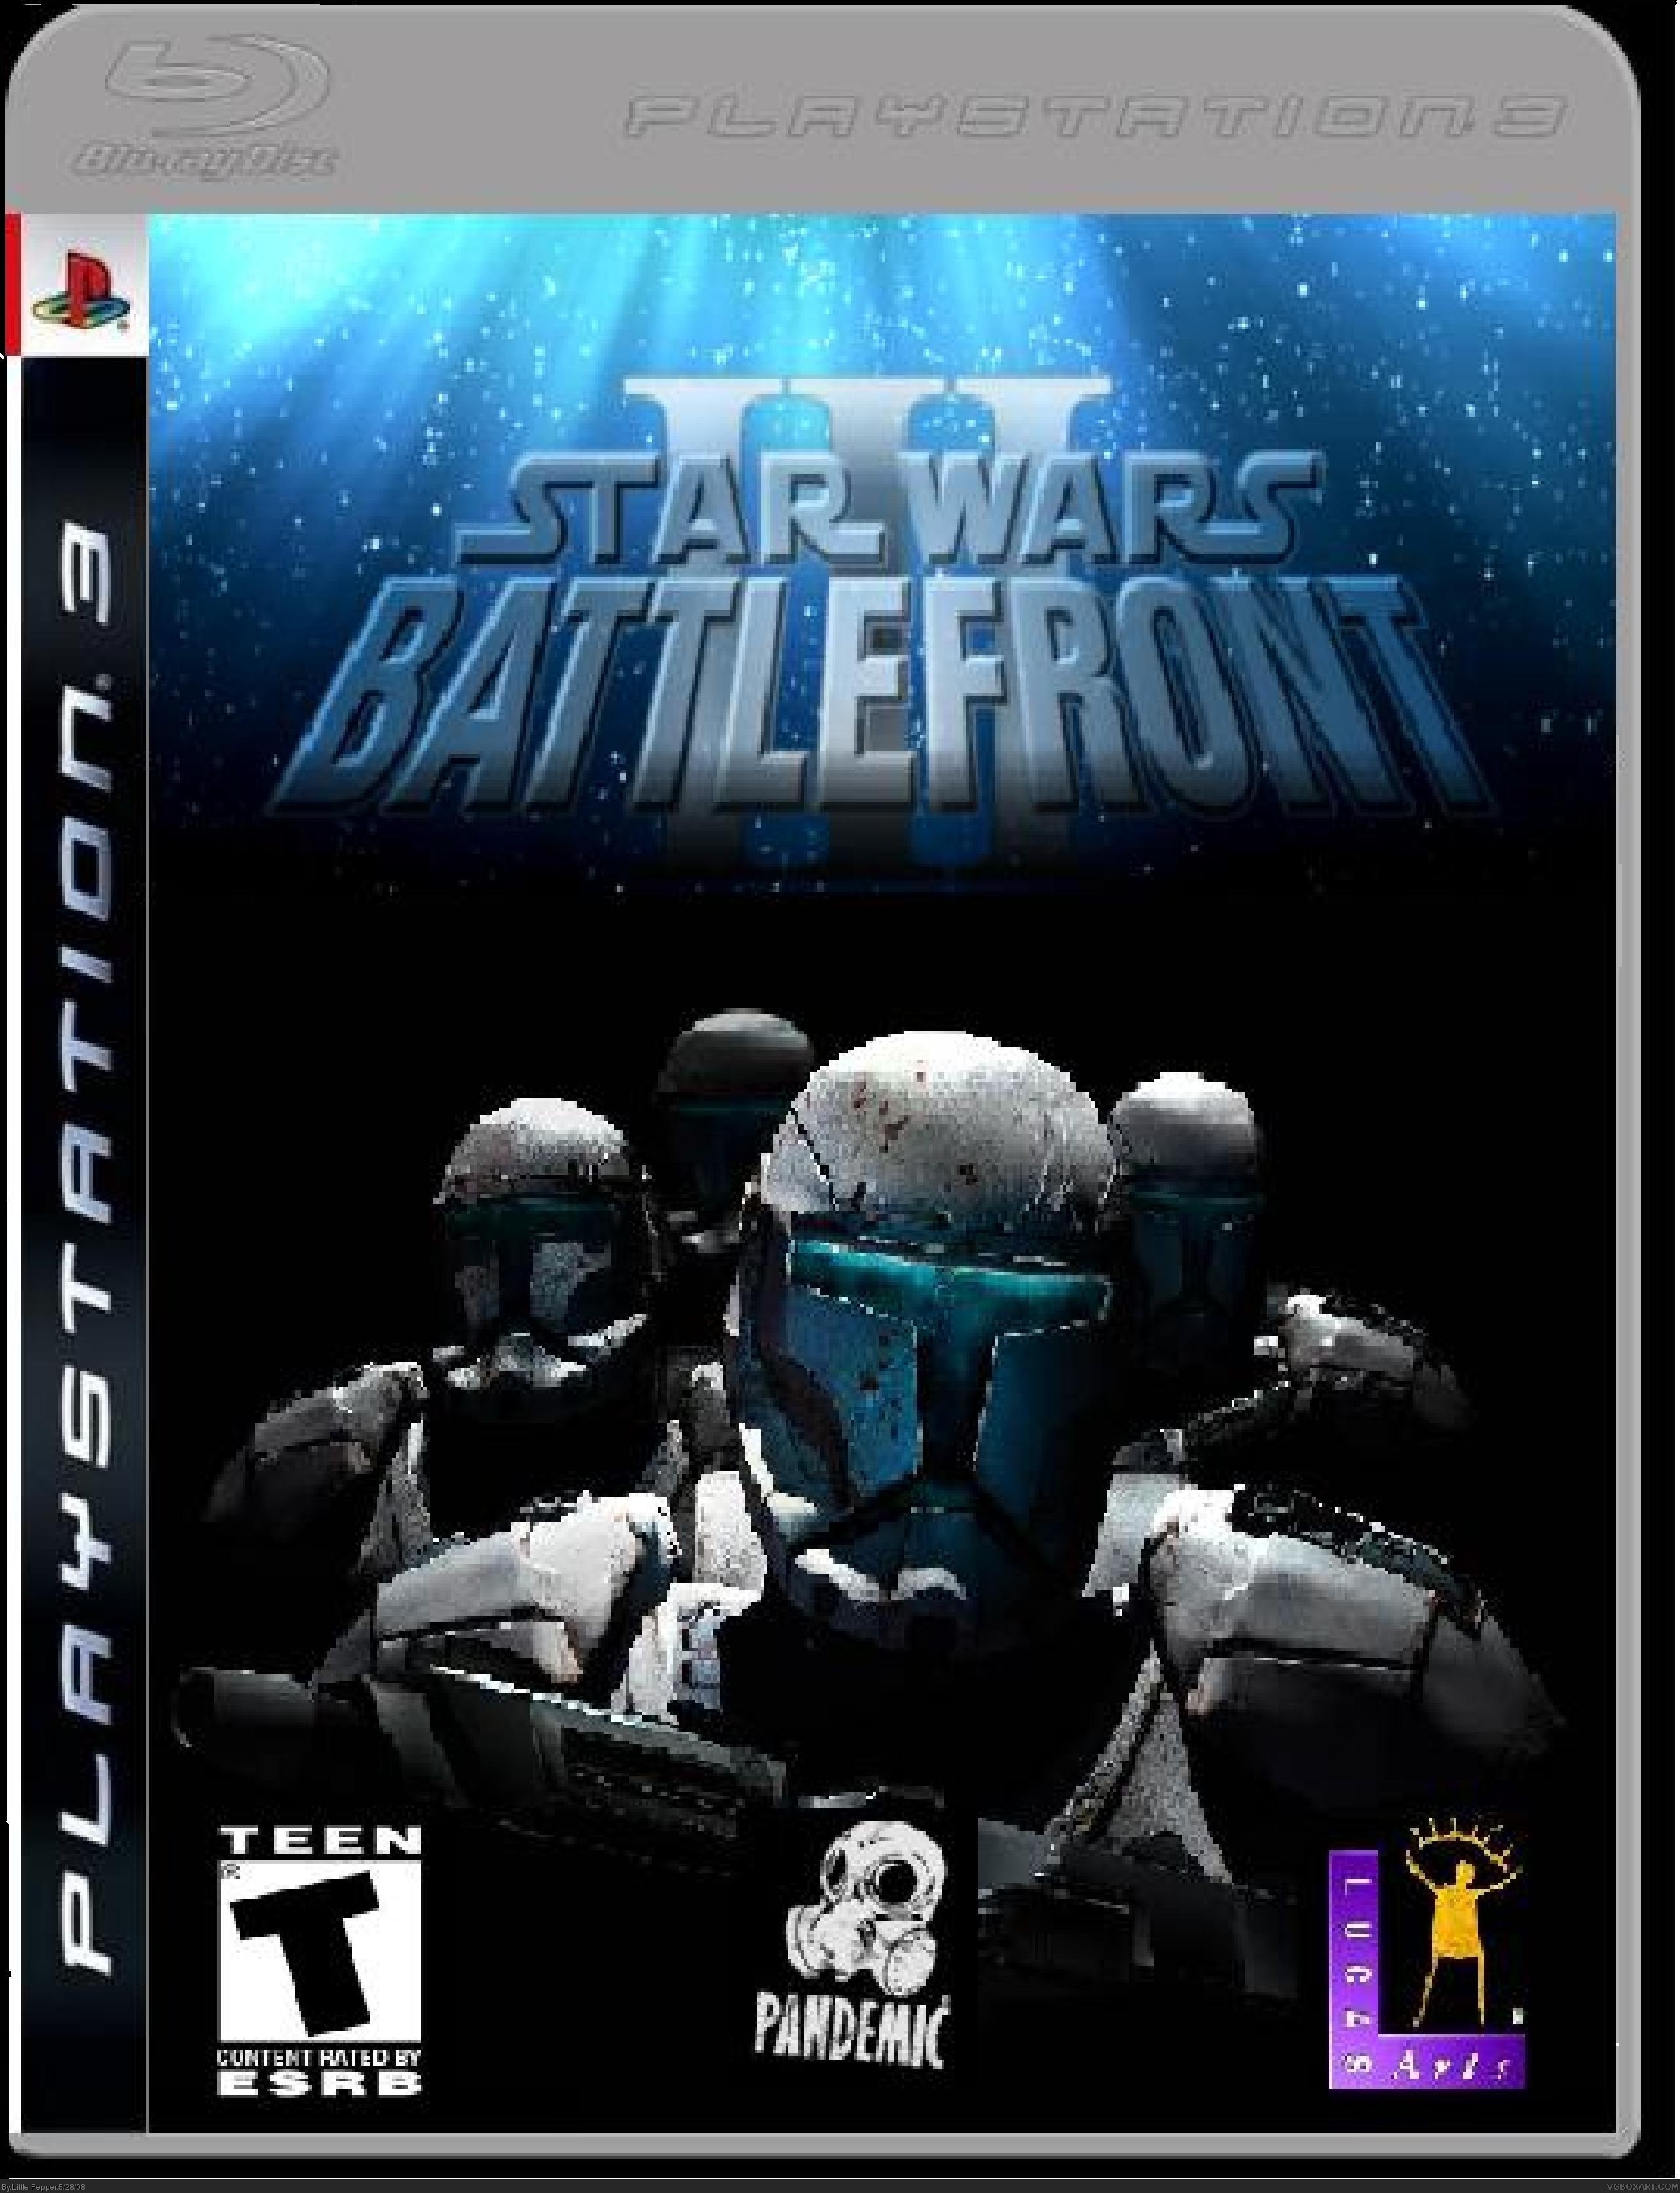 Star Wars: Battlefront III box cover